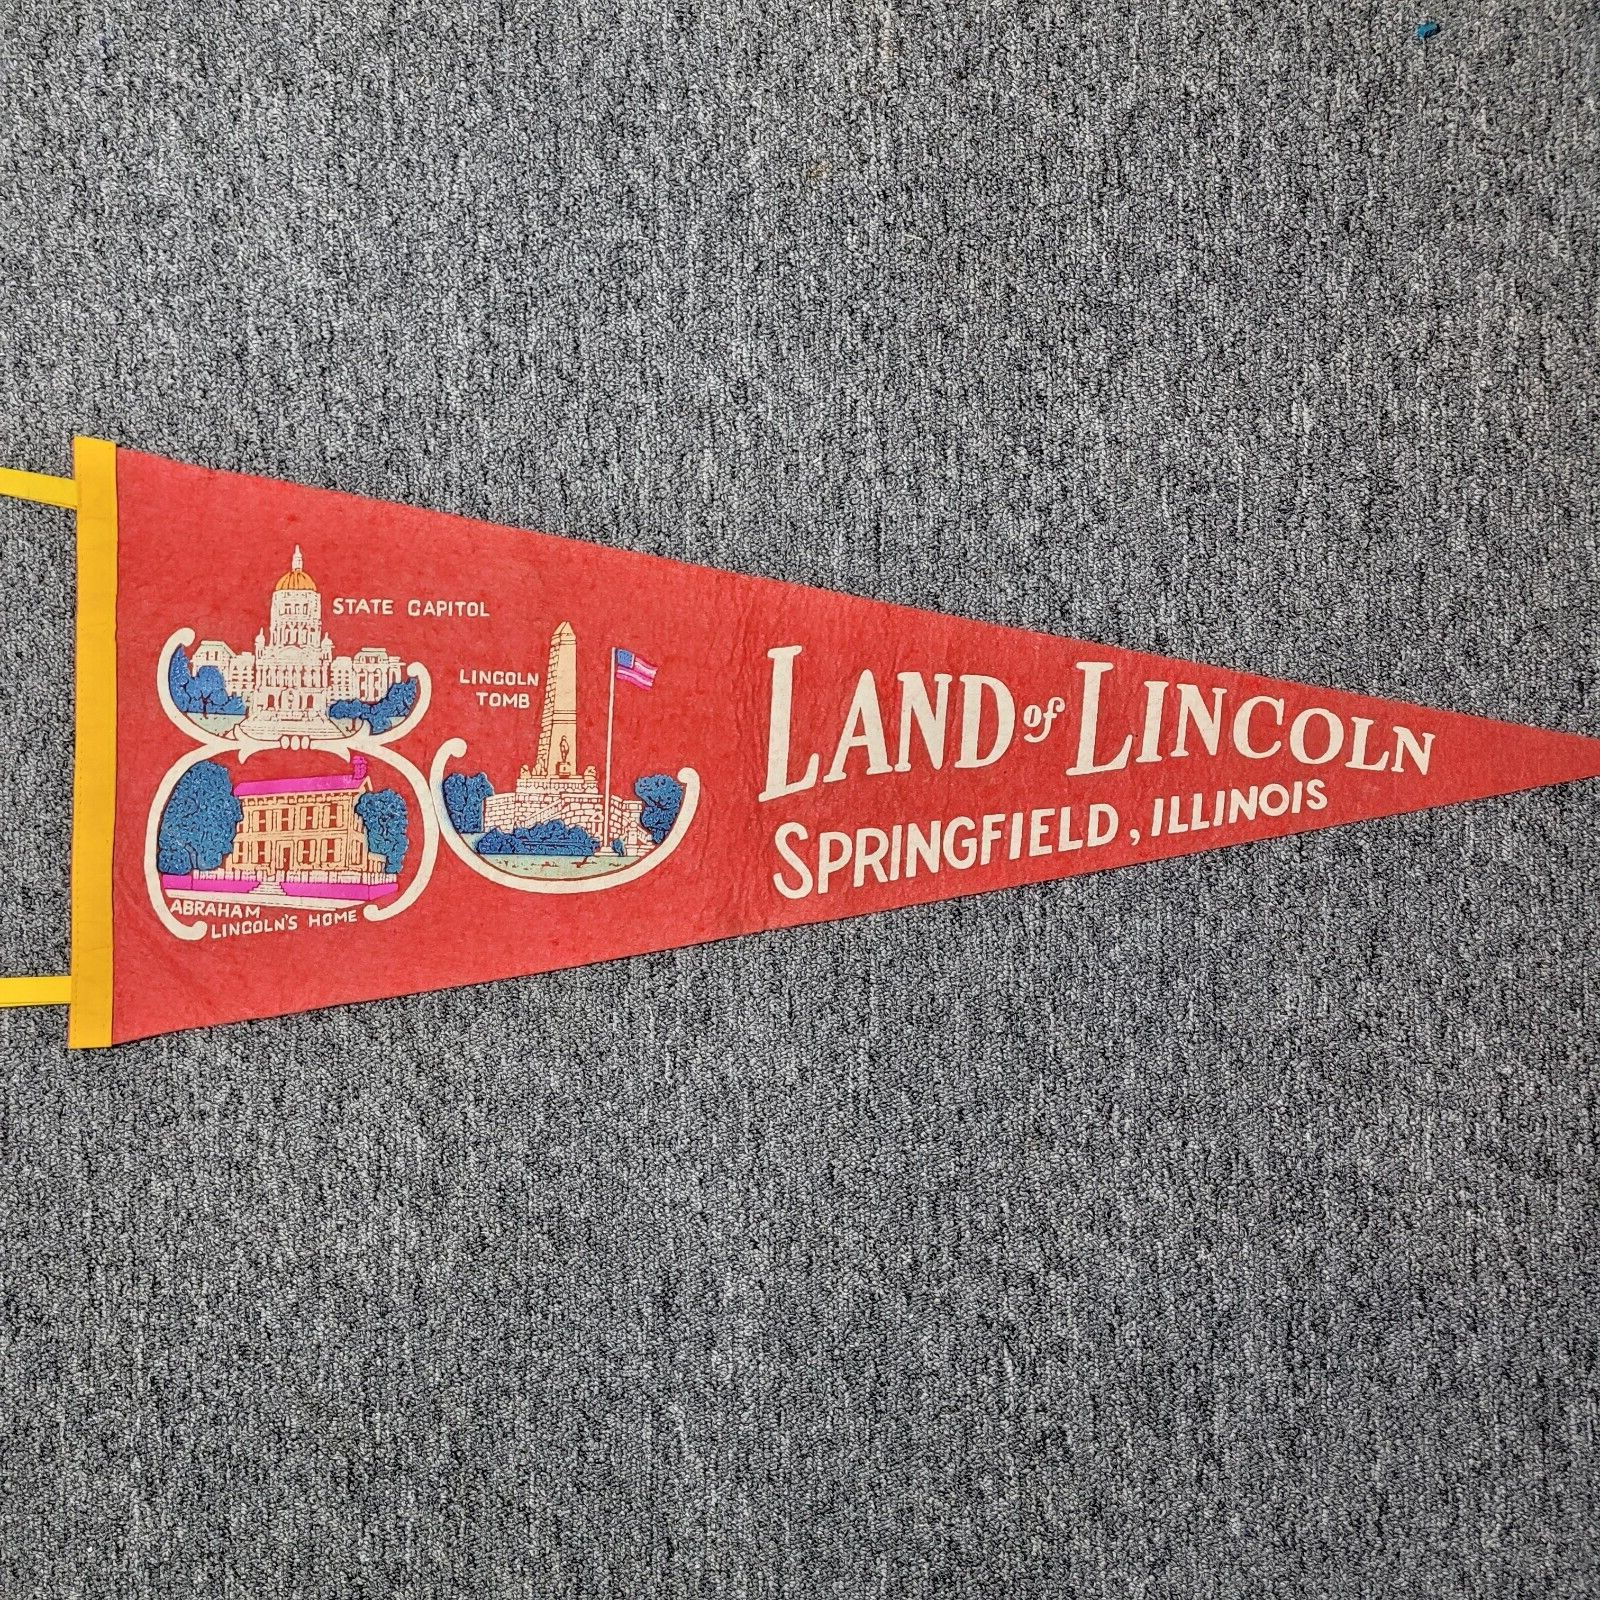 Vintage 1960s Land of Lincoln Springfield IL Red Souvenir Travel Felt Pennant